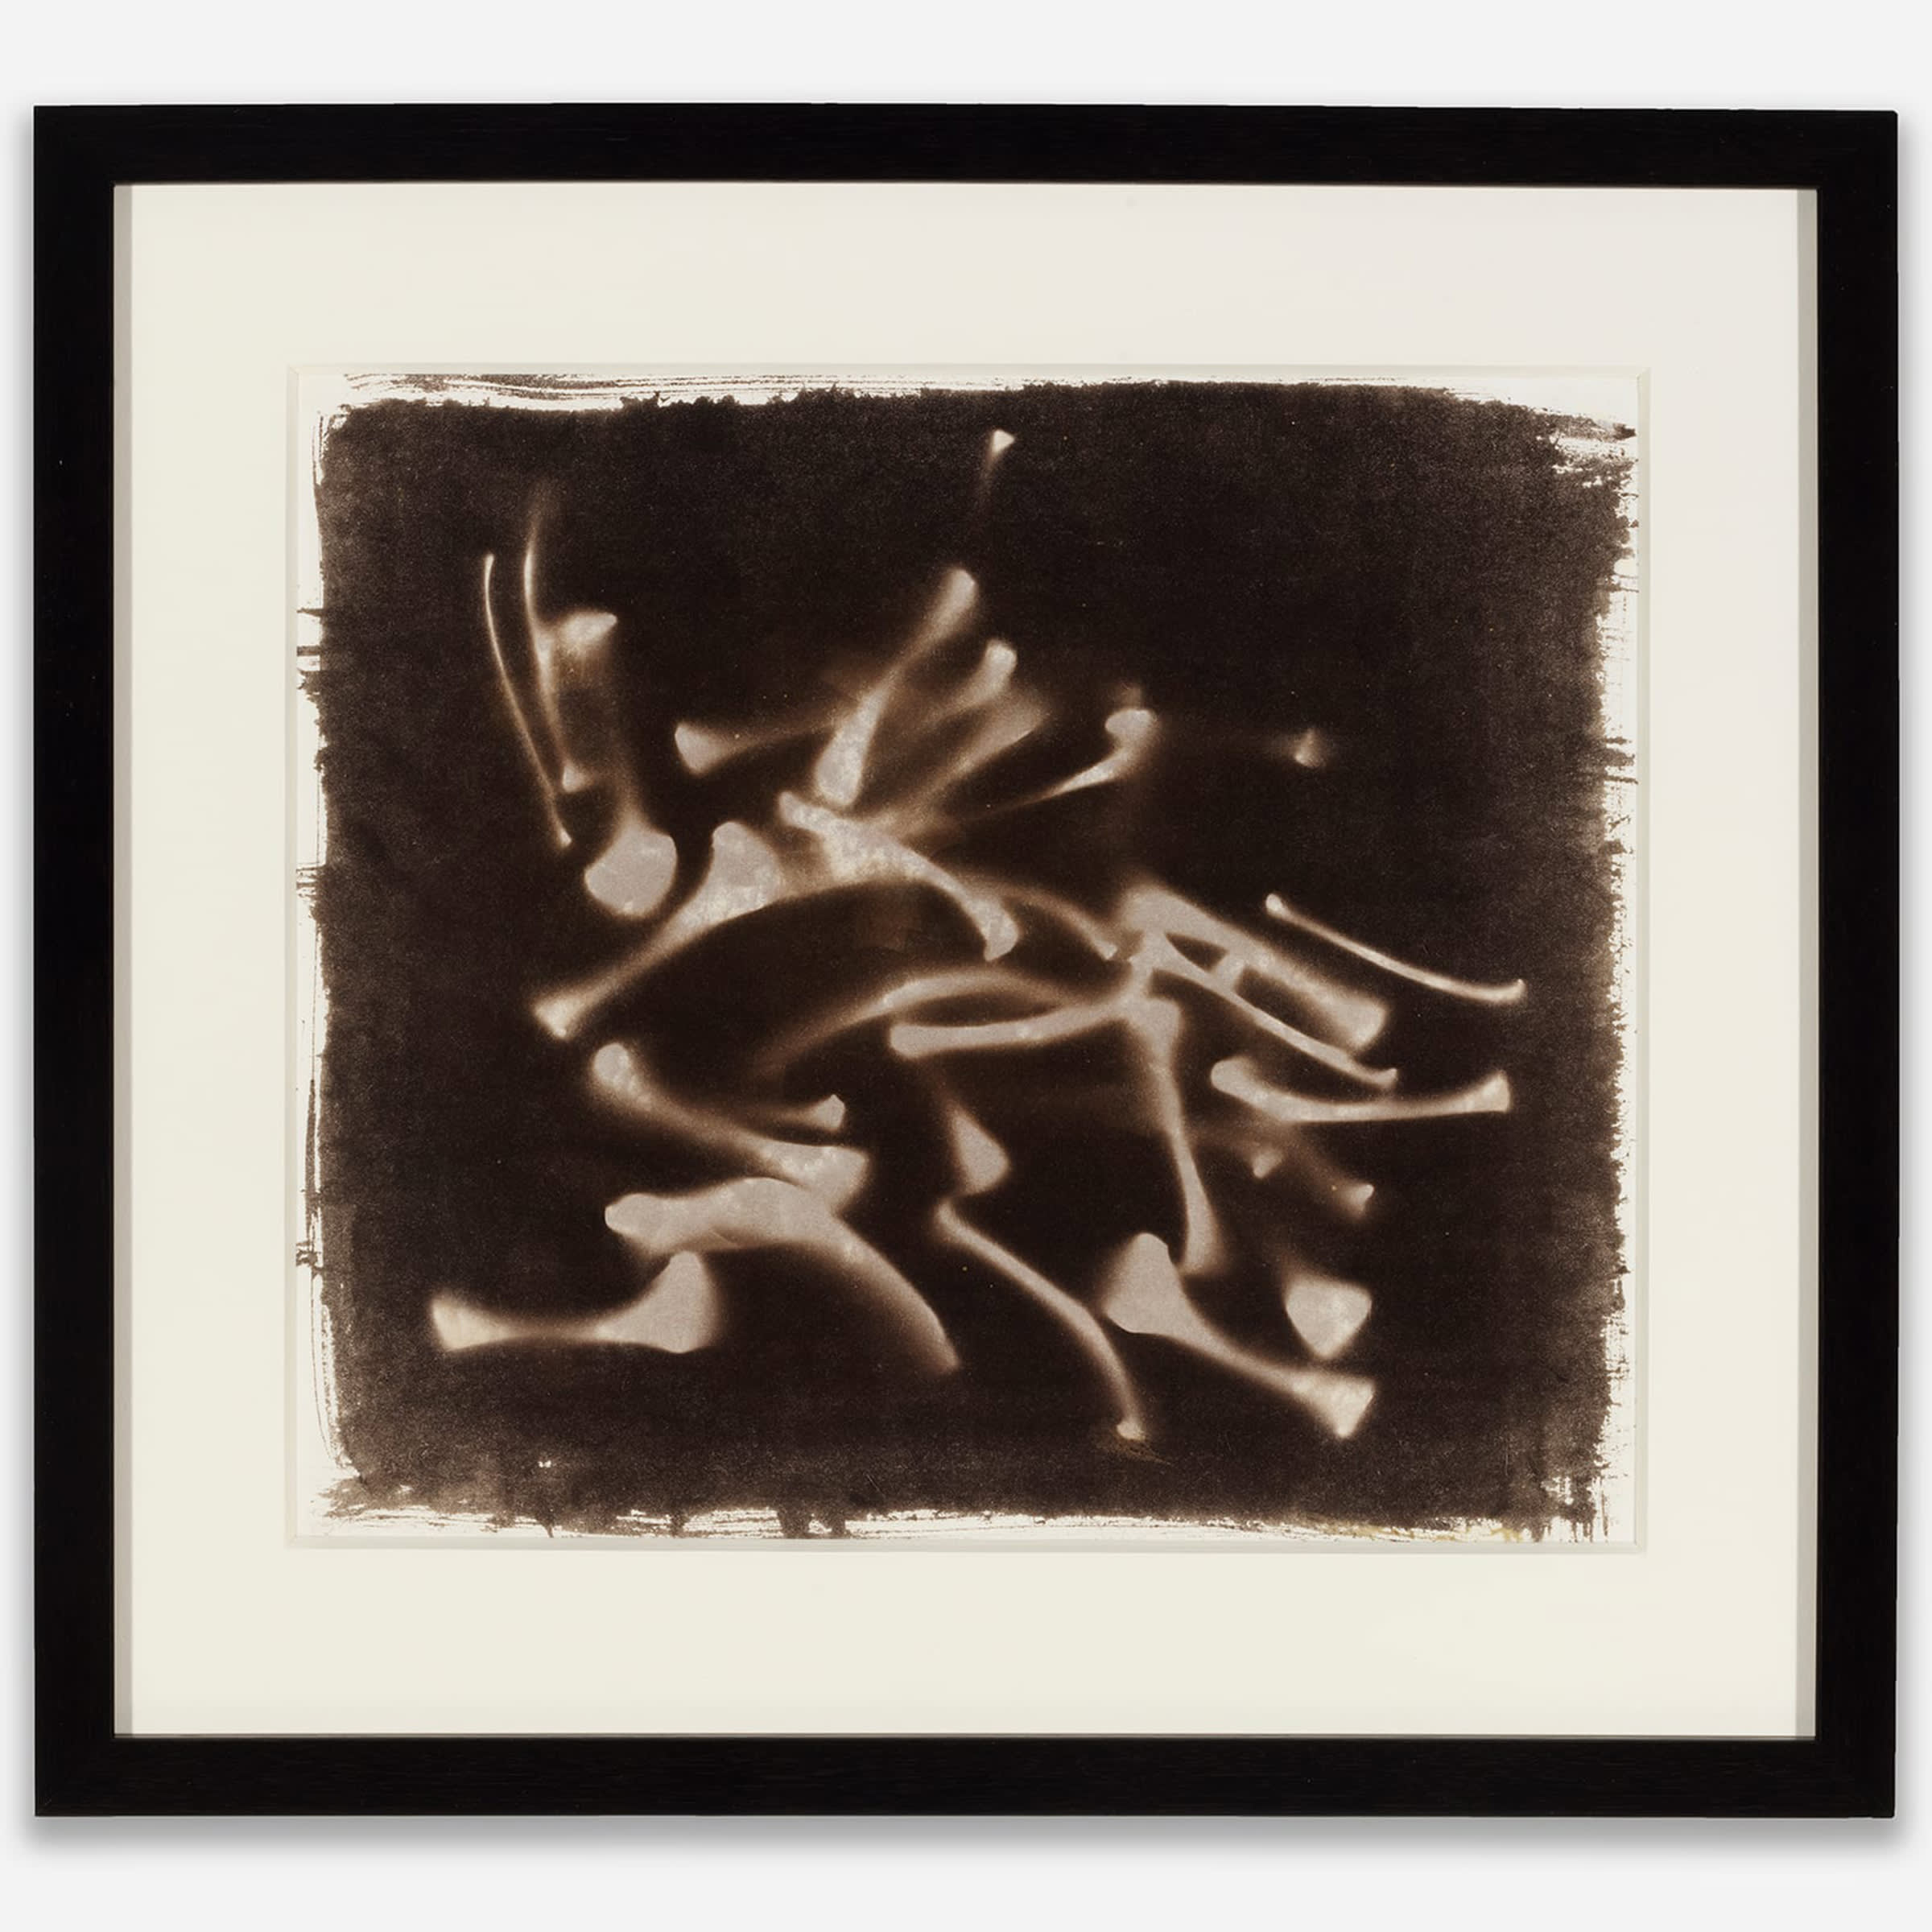 Rashid Johnson, Untitled (Chicken Bones), 1999. Presented at Art Basel Hong Kong and in 'OVR: Hong Kong' by Gray (Chicago). Courtesy of the artist and Gray.